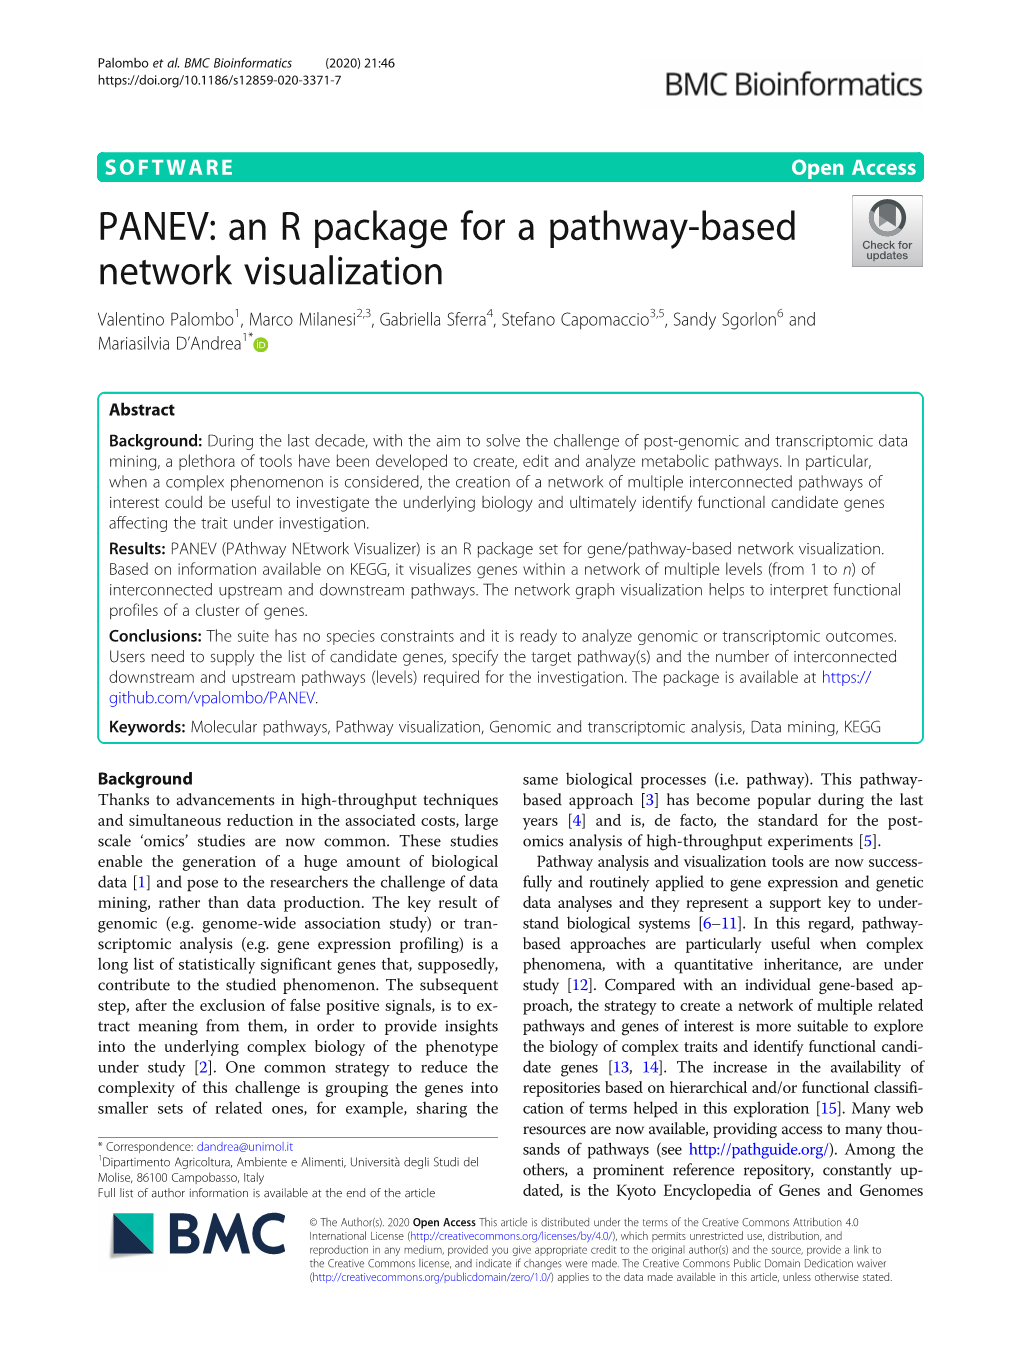 An R Package for a Pathway-Based Network Visualization